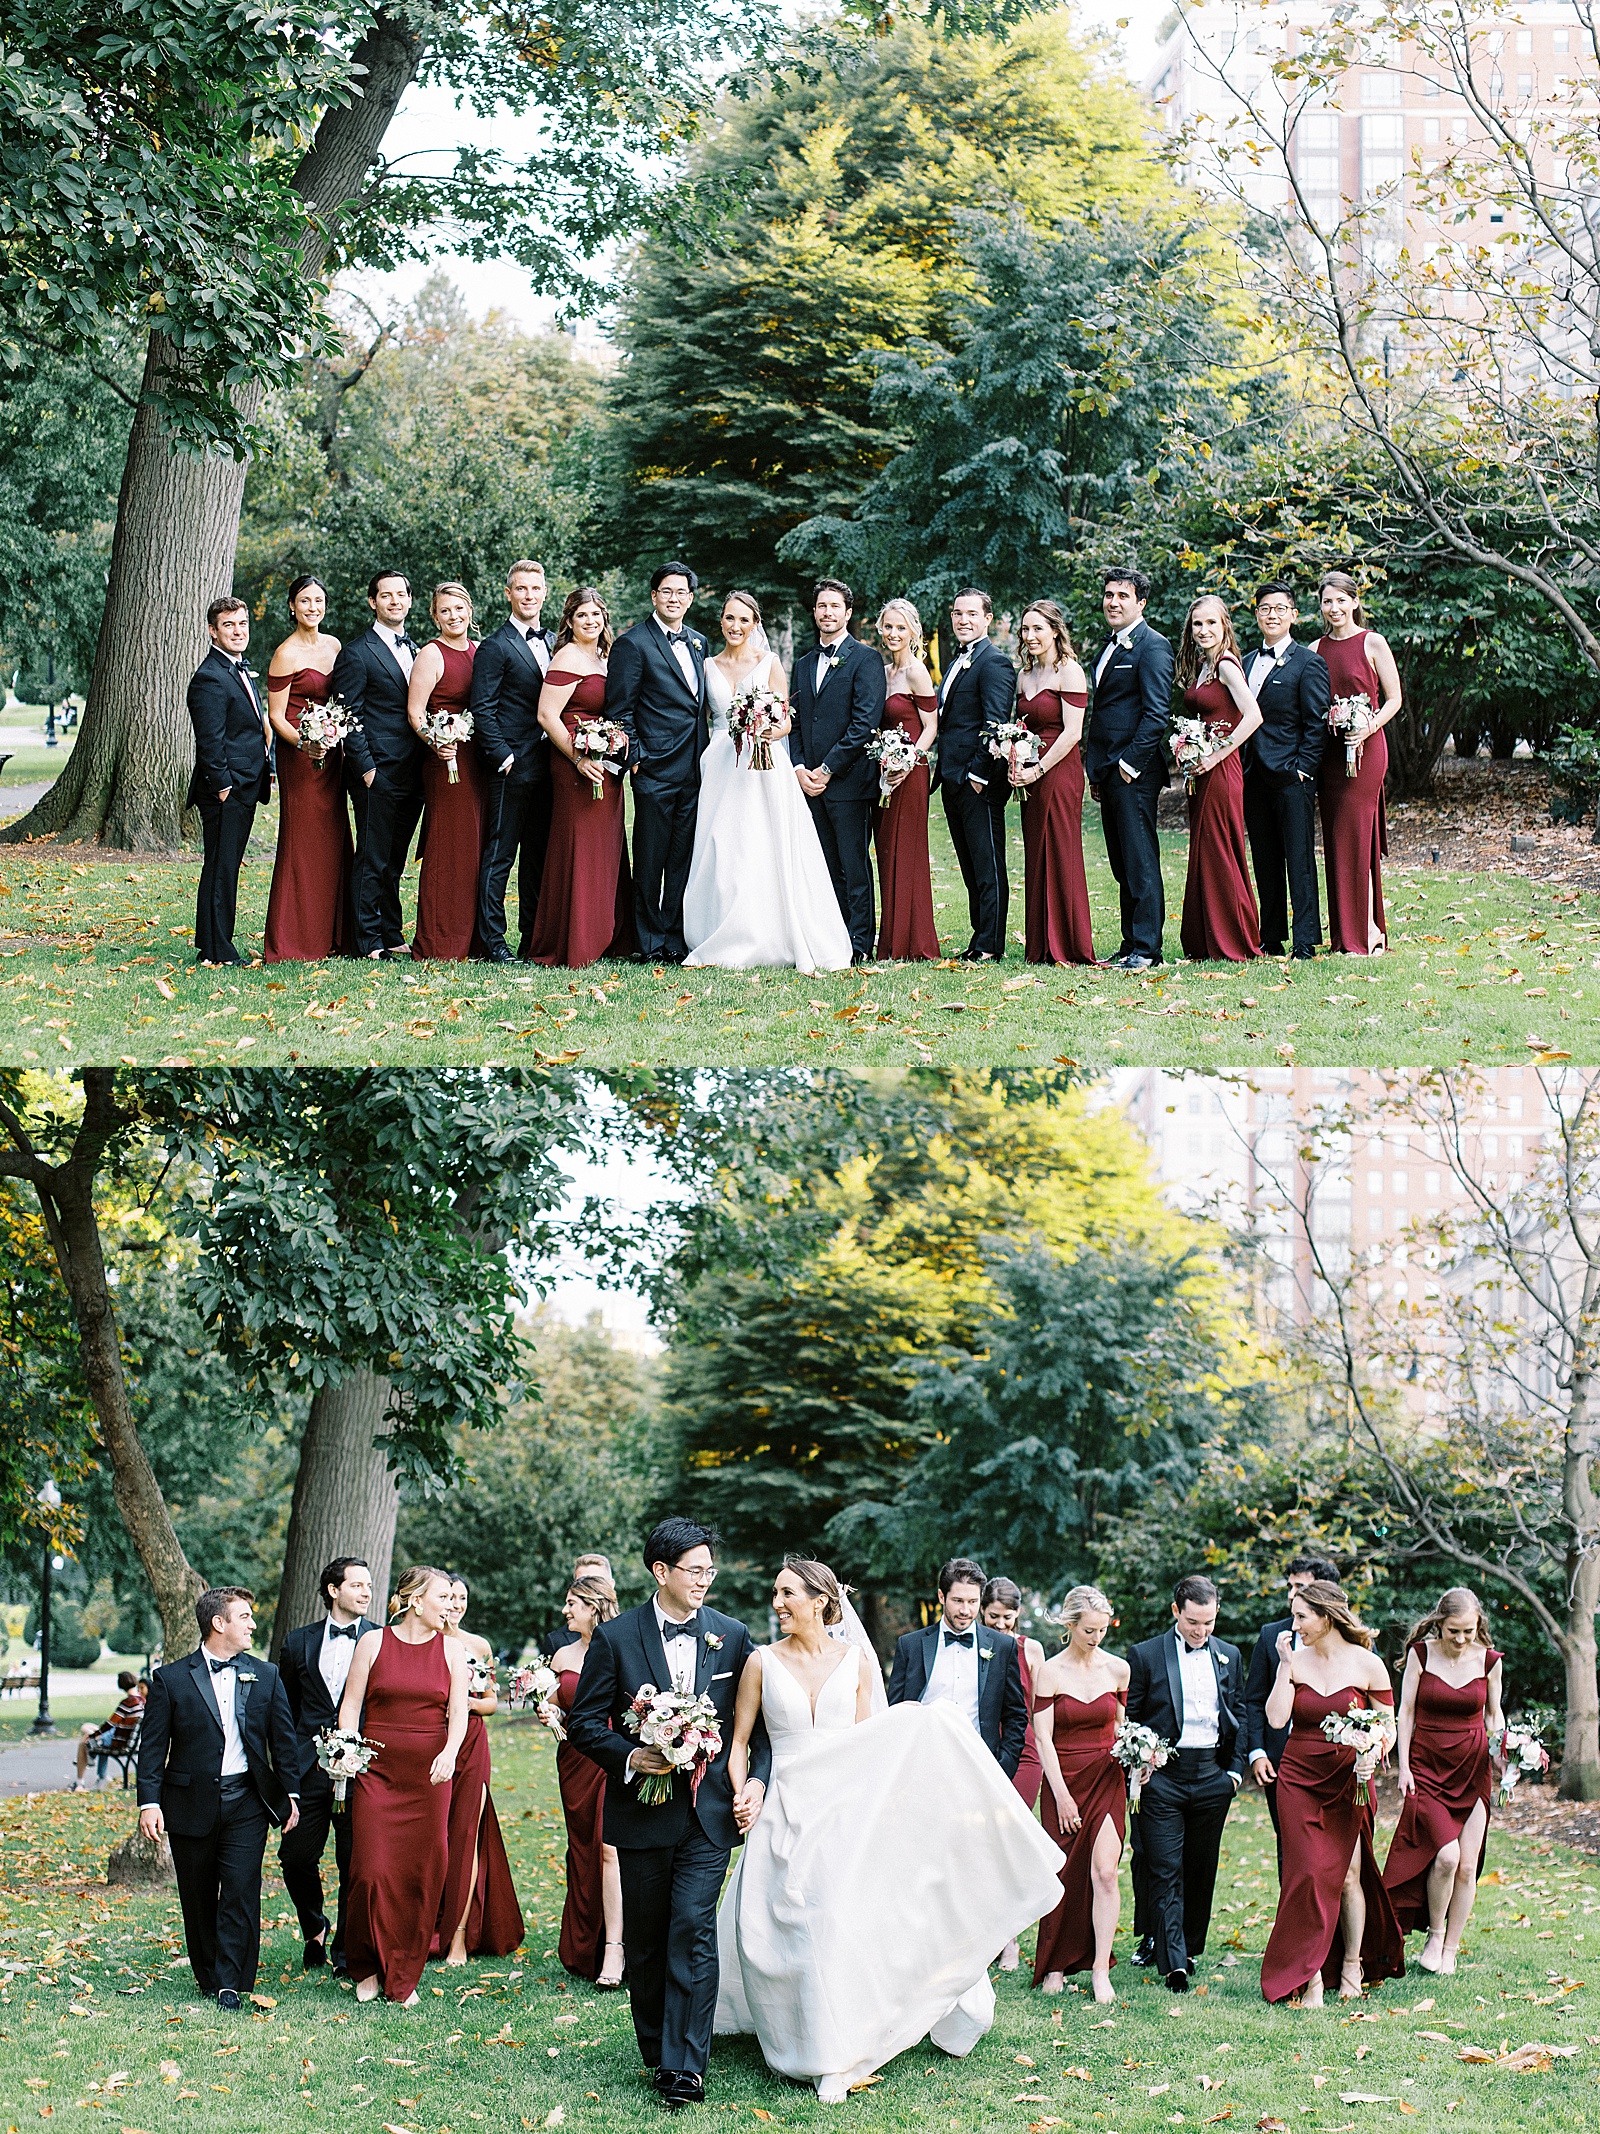 Large wedding party wearing black suits and dark red dresses standing in a garden for their formal portraits at a wedding. 